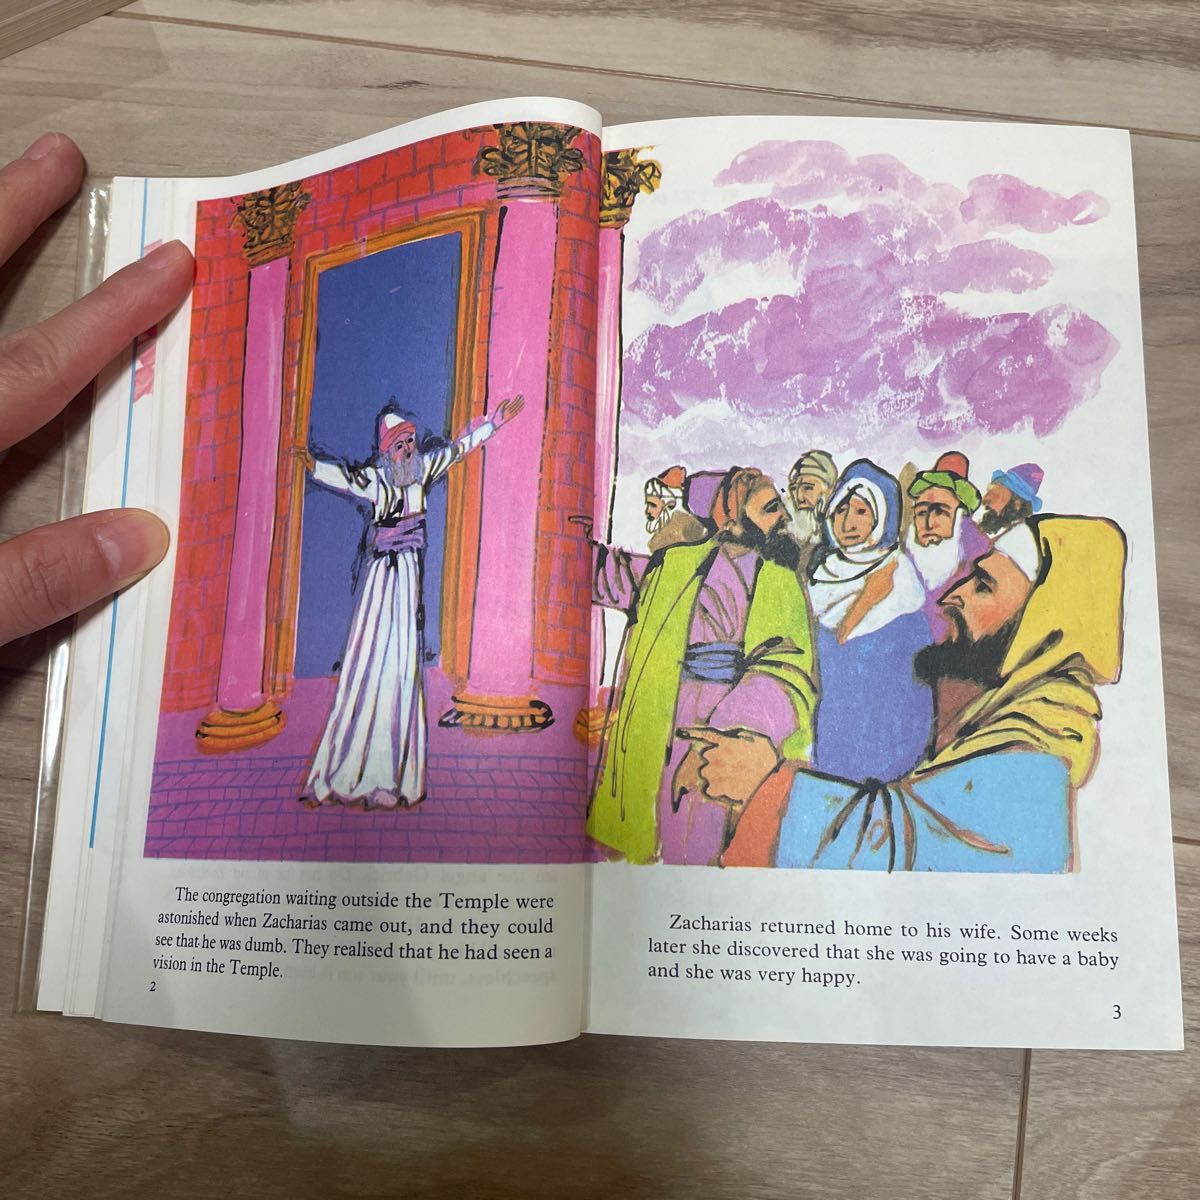 A Child’s BIBLE 